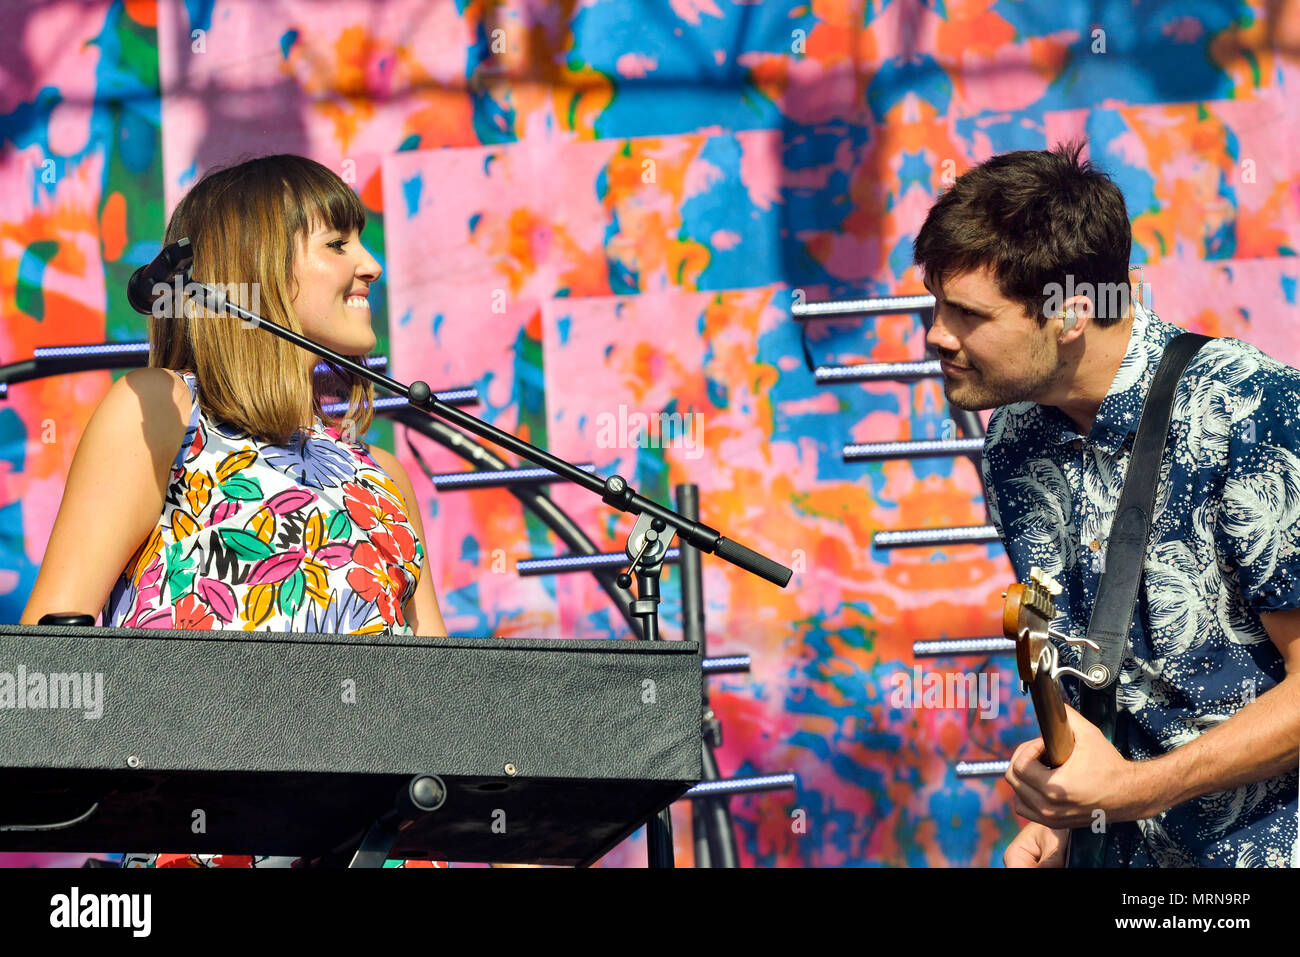 Napa Valley, California, May 26, 2018, Josephine Vander Gucht of the band Oh Wonder on stage at the 2018 BottleRock Festival in Napa California. Stock Photo